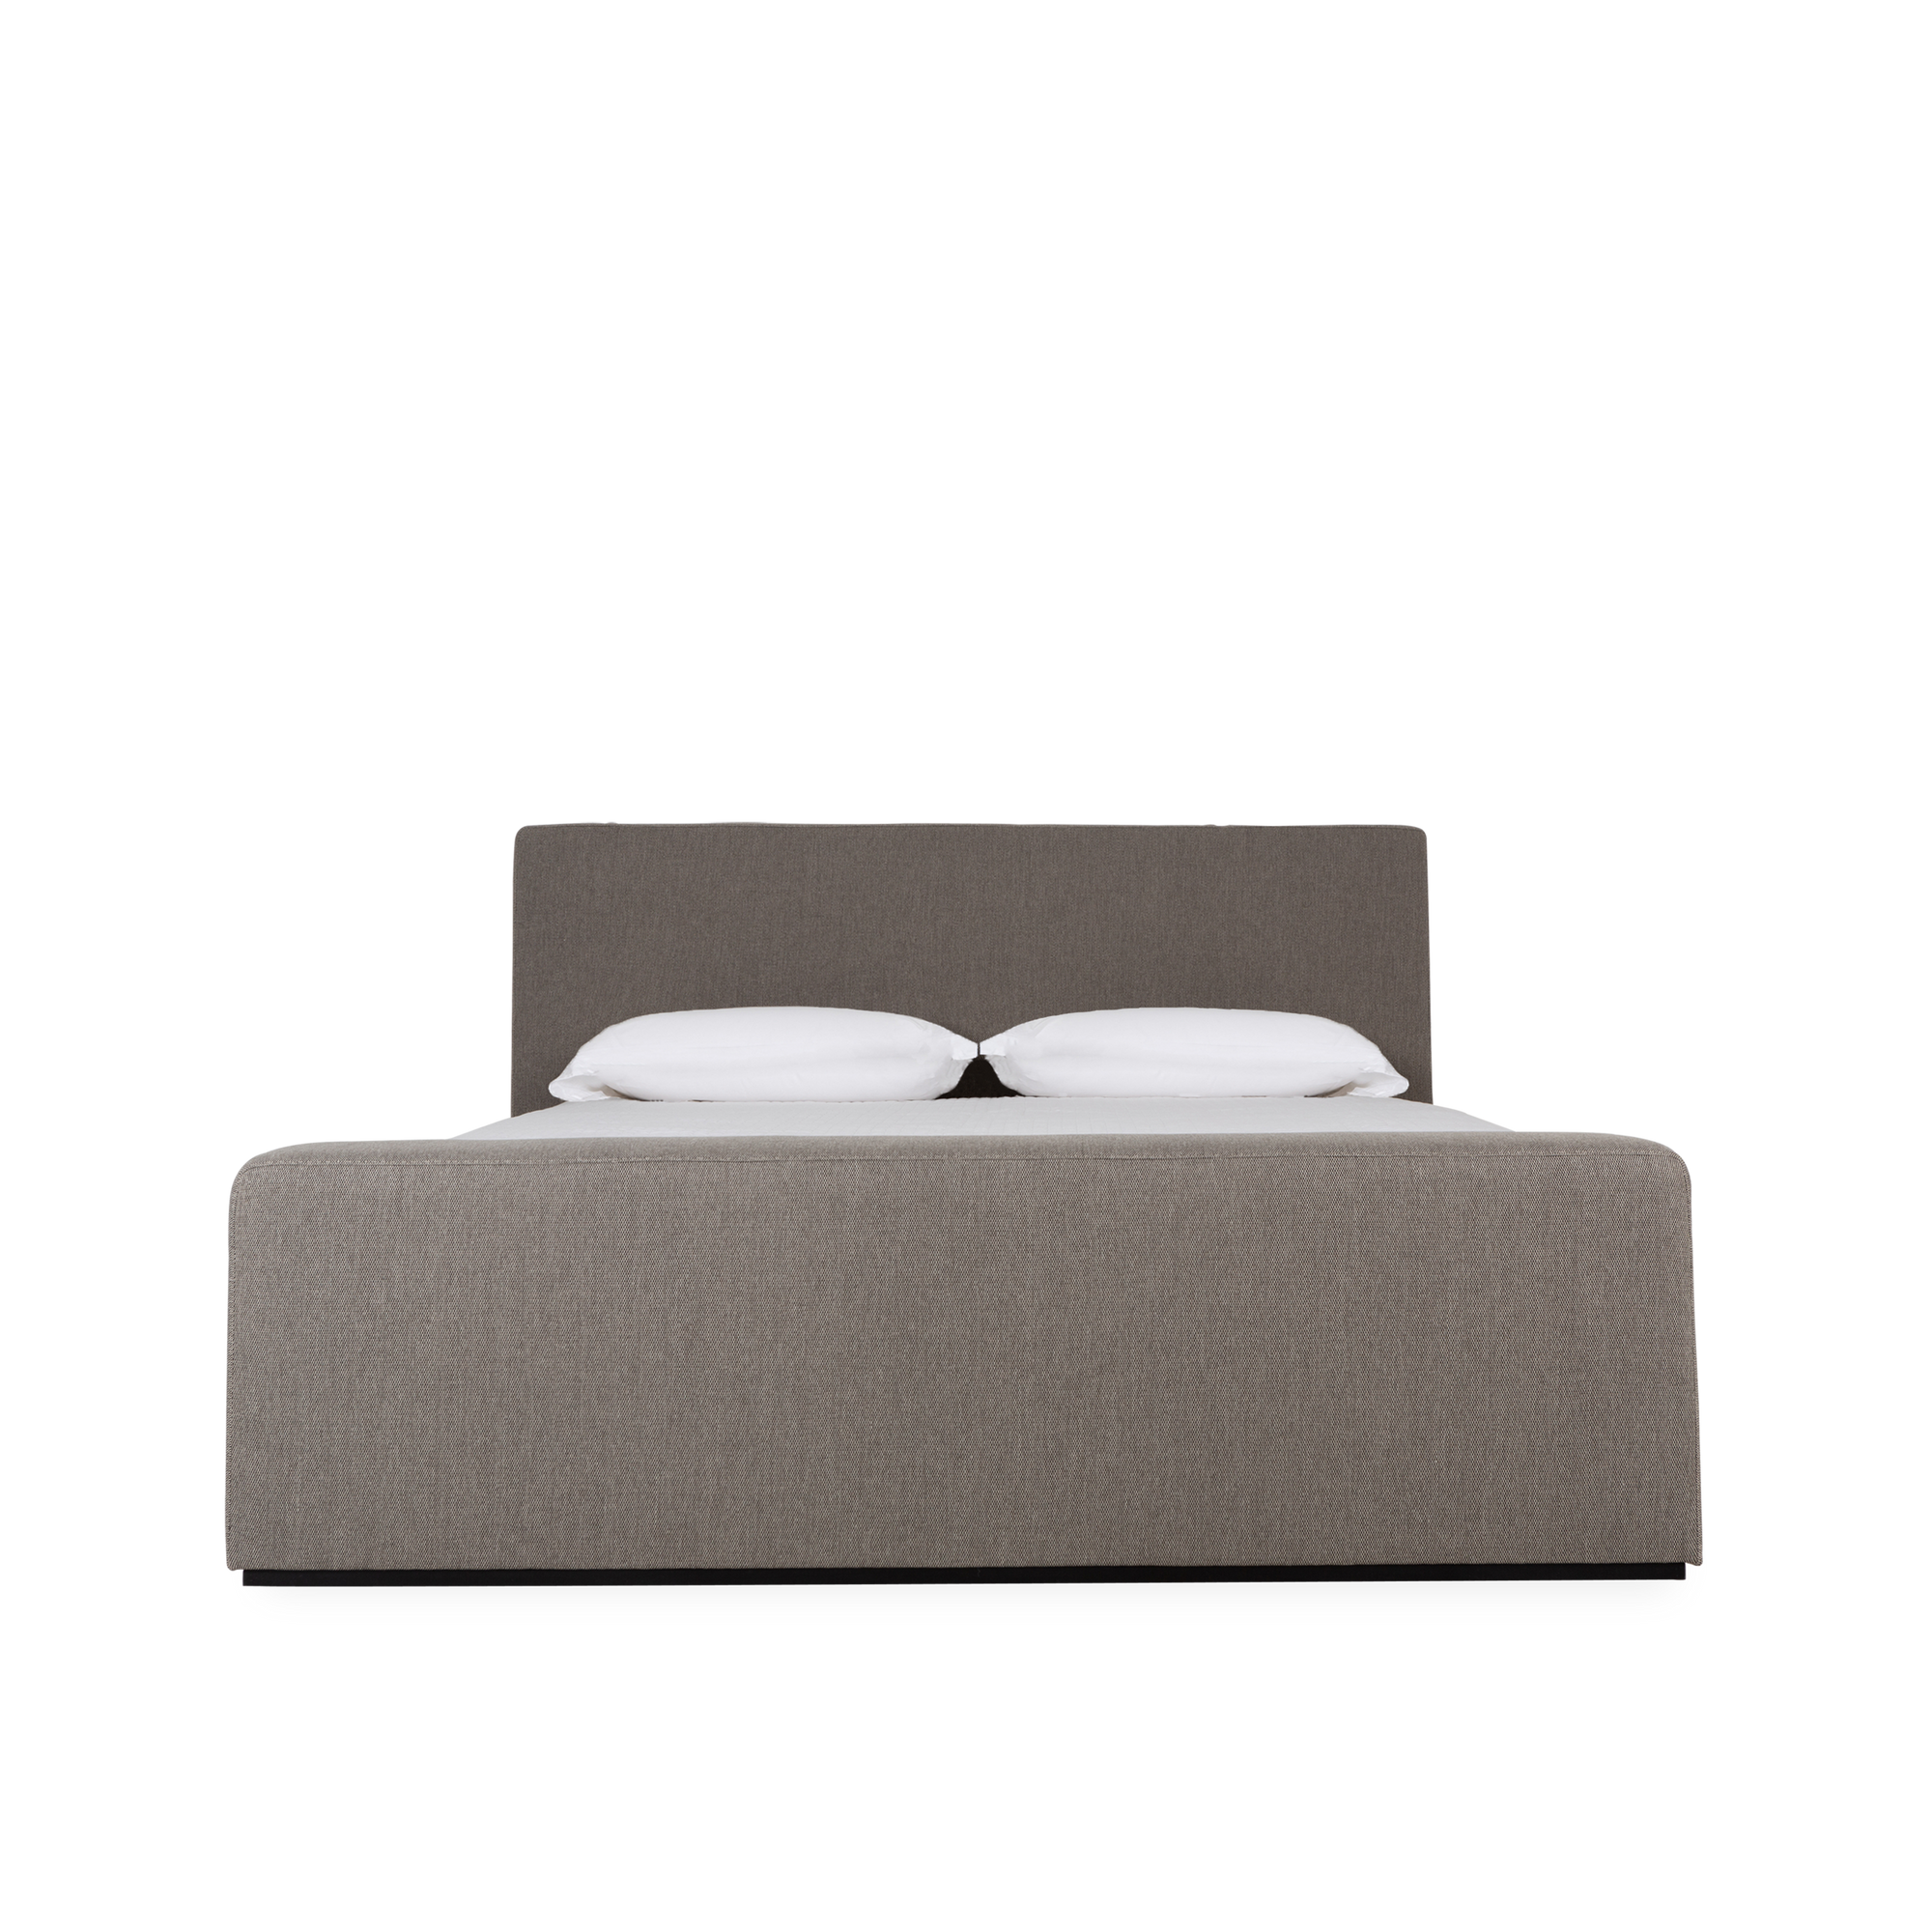 Vital Bed With Bench Footboard